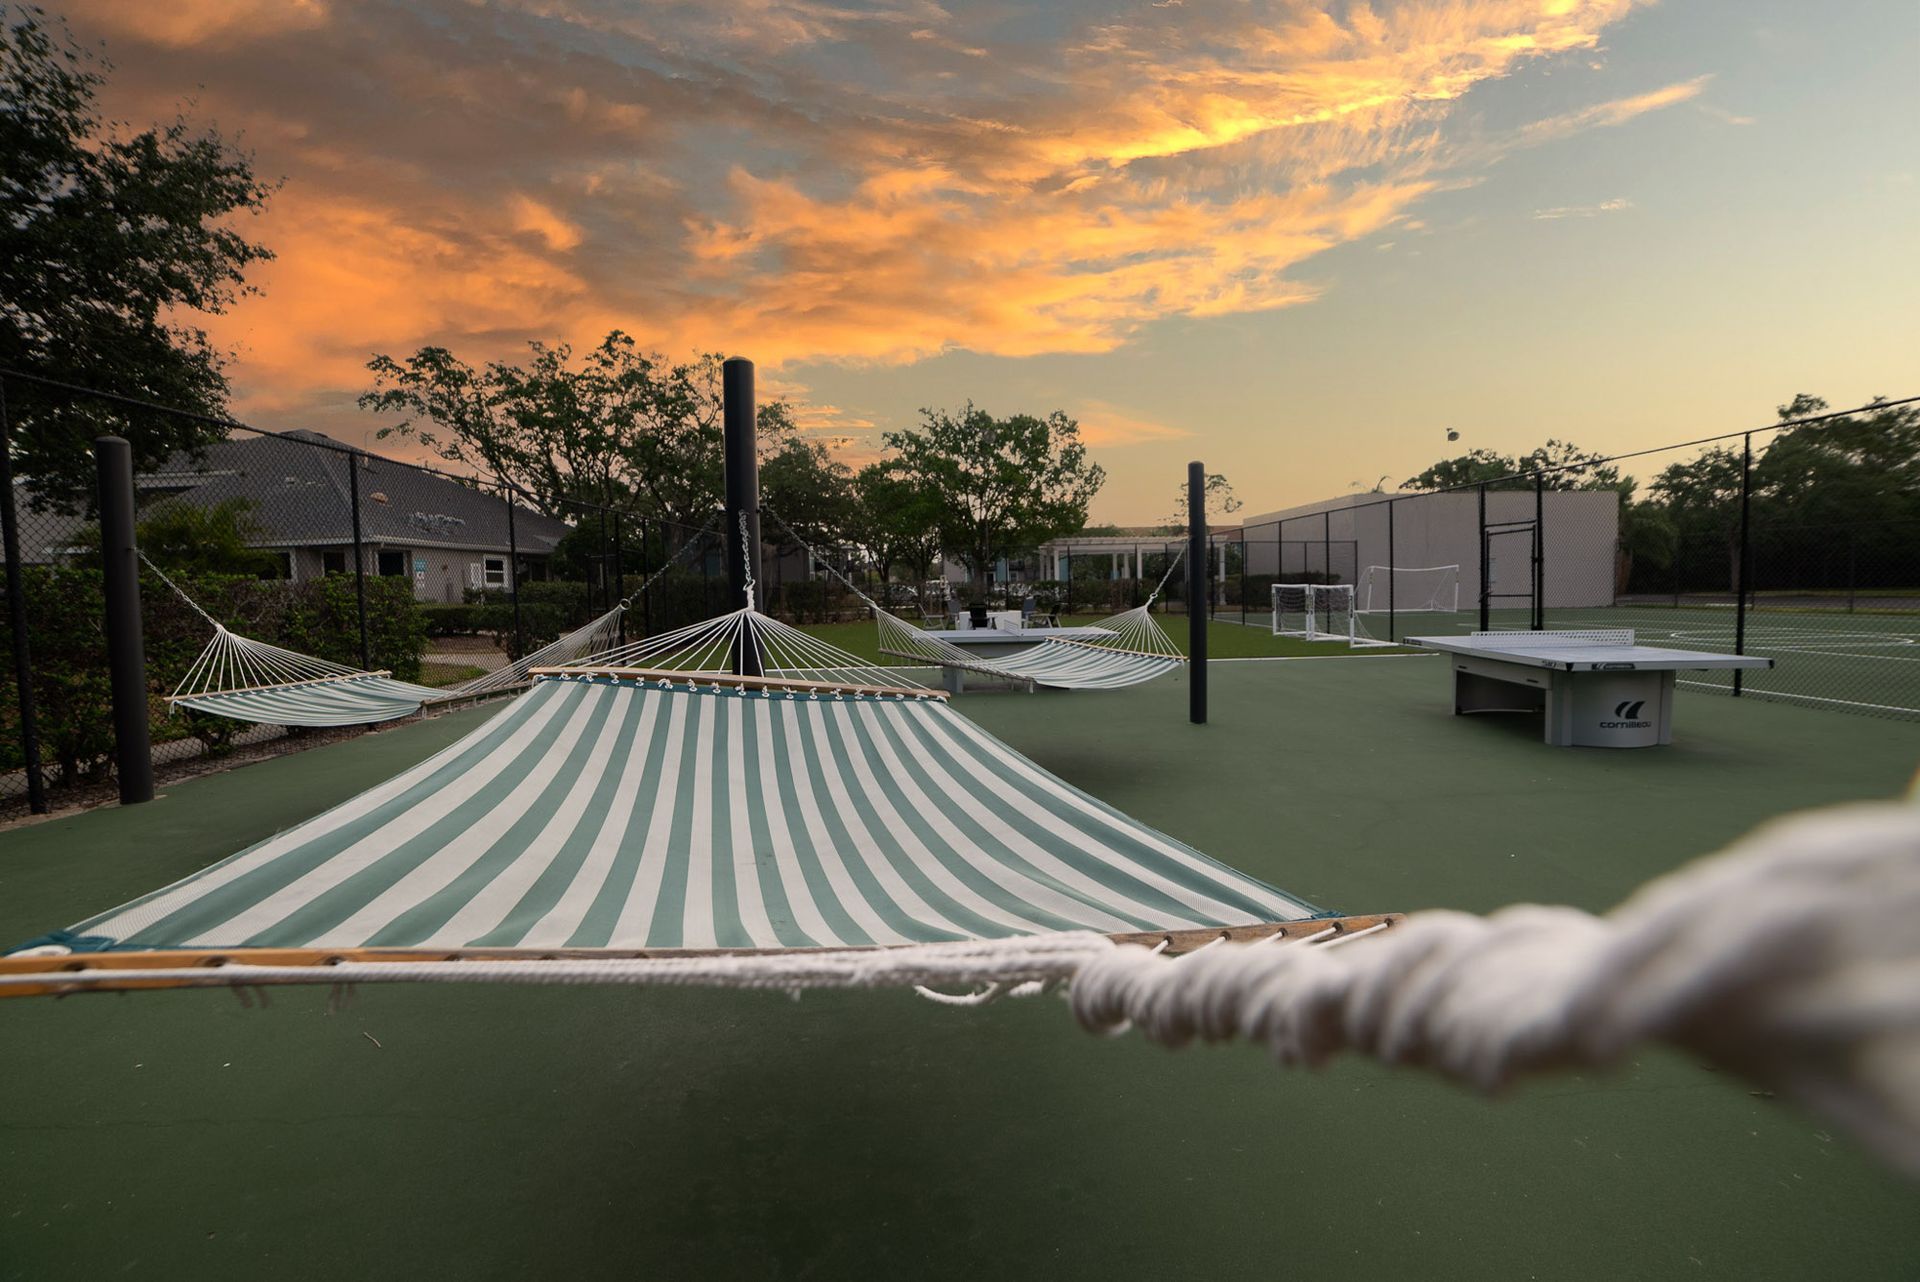 A hammock is hanging from a rope on a tennis court at sunset at Trellis at The Lakes.